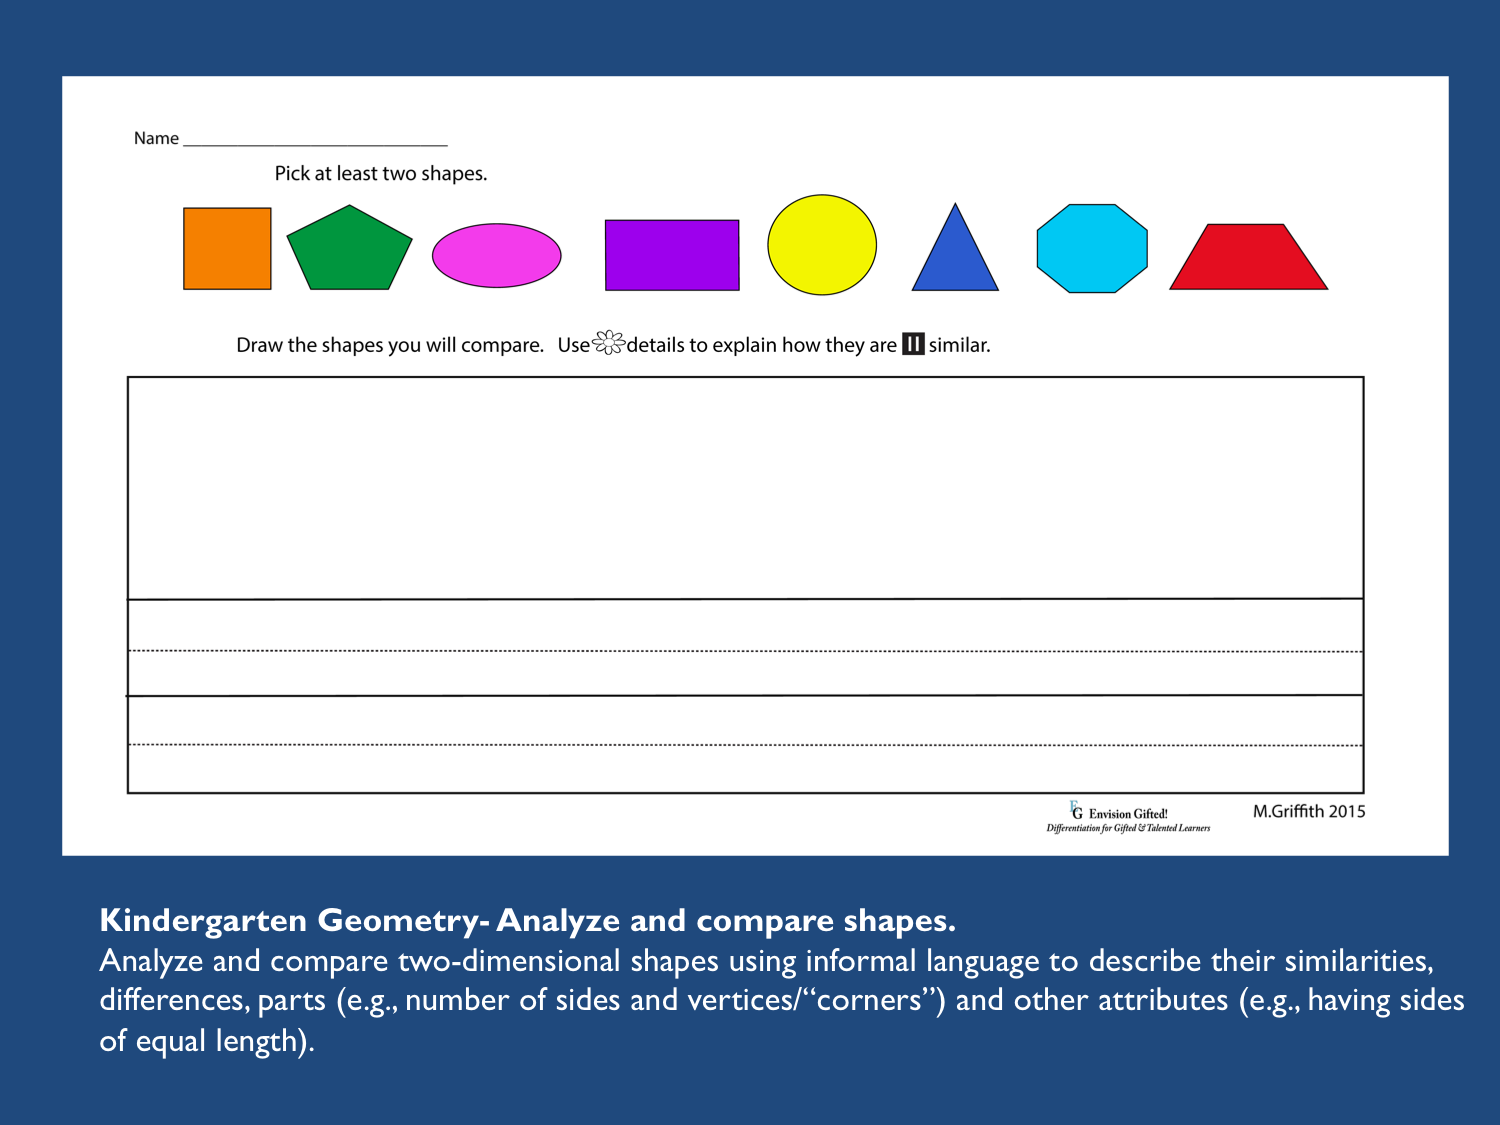 Image shows Primary Differentiated Shapes